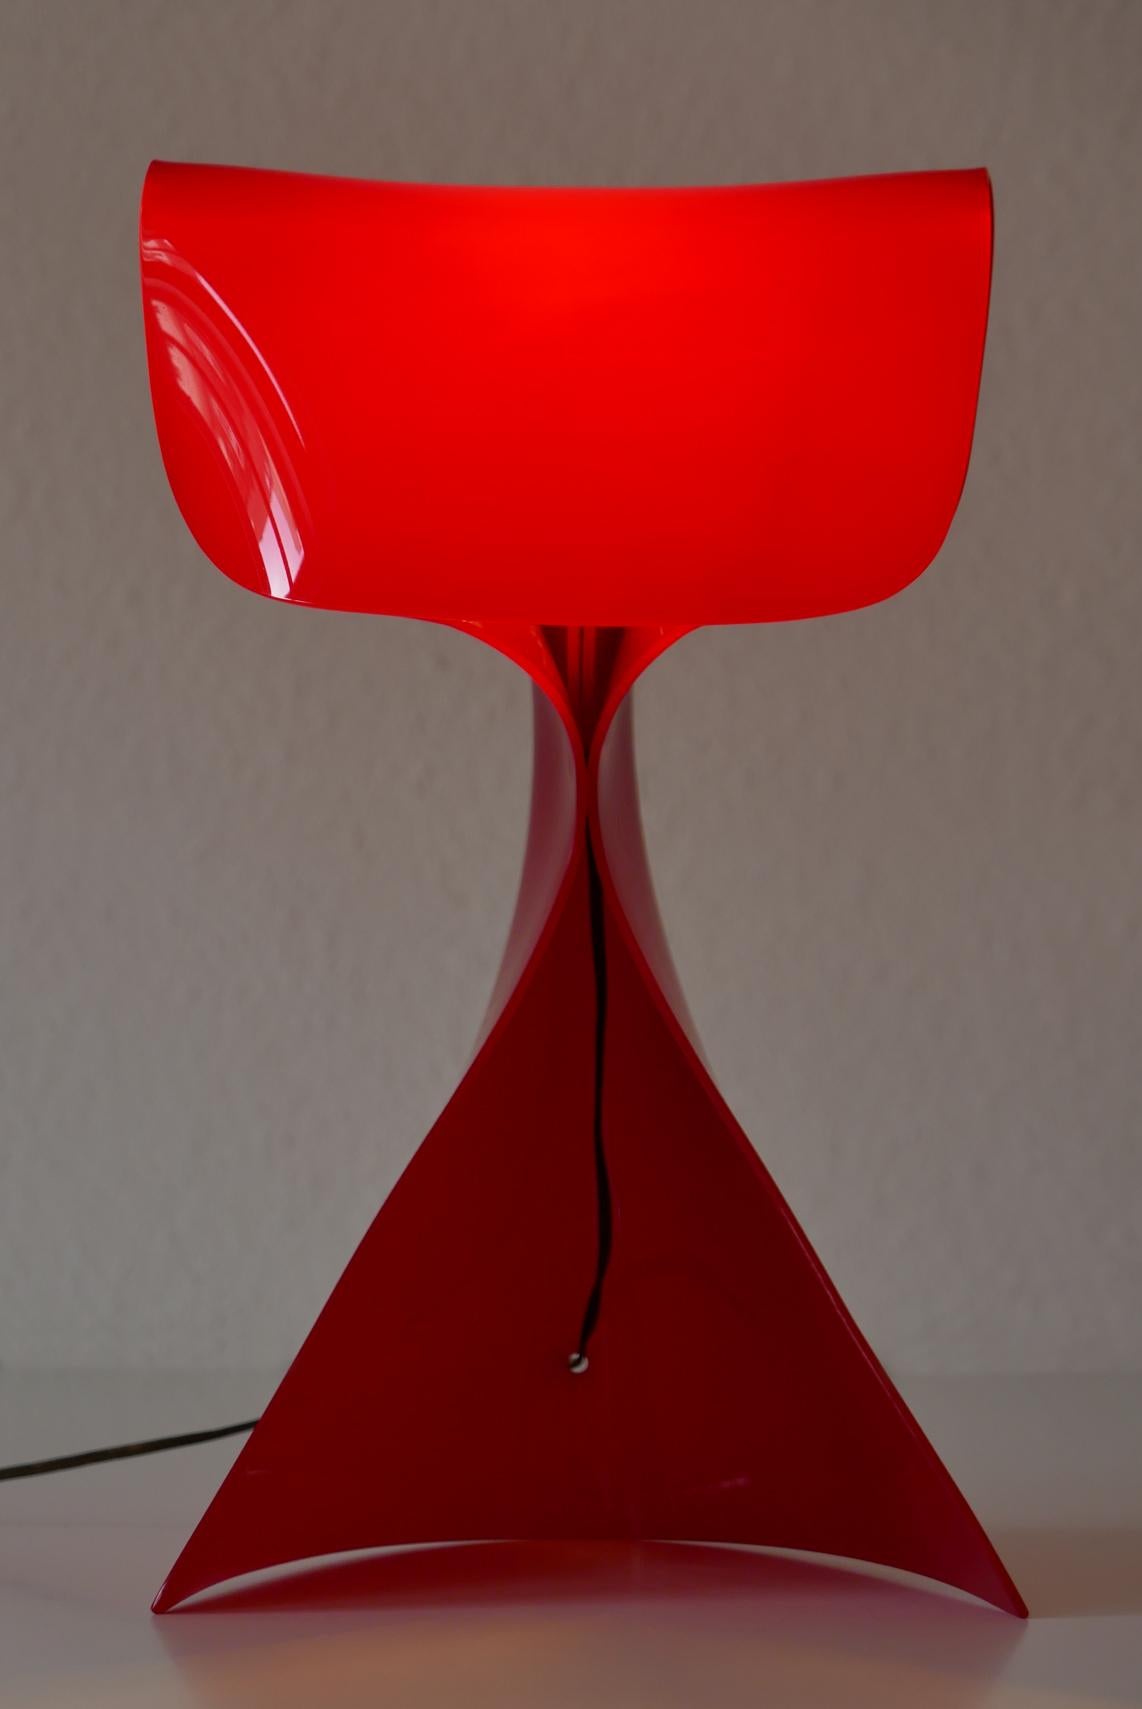 Exceptional Table Lamp by Hanns Hoffmann-Lederer for Heinz Hecht, 1950s, Germany For Sale 3